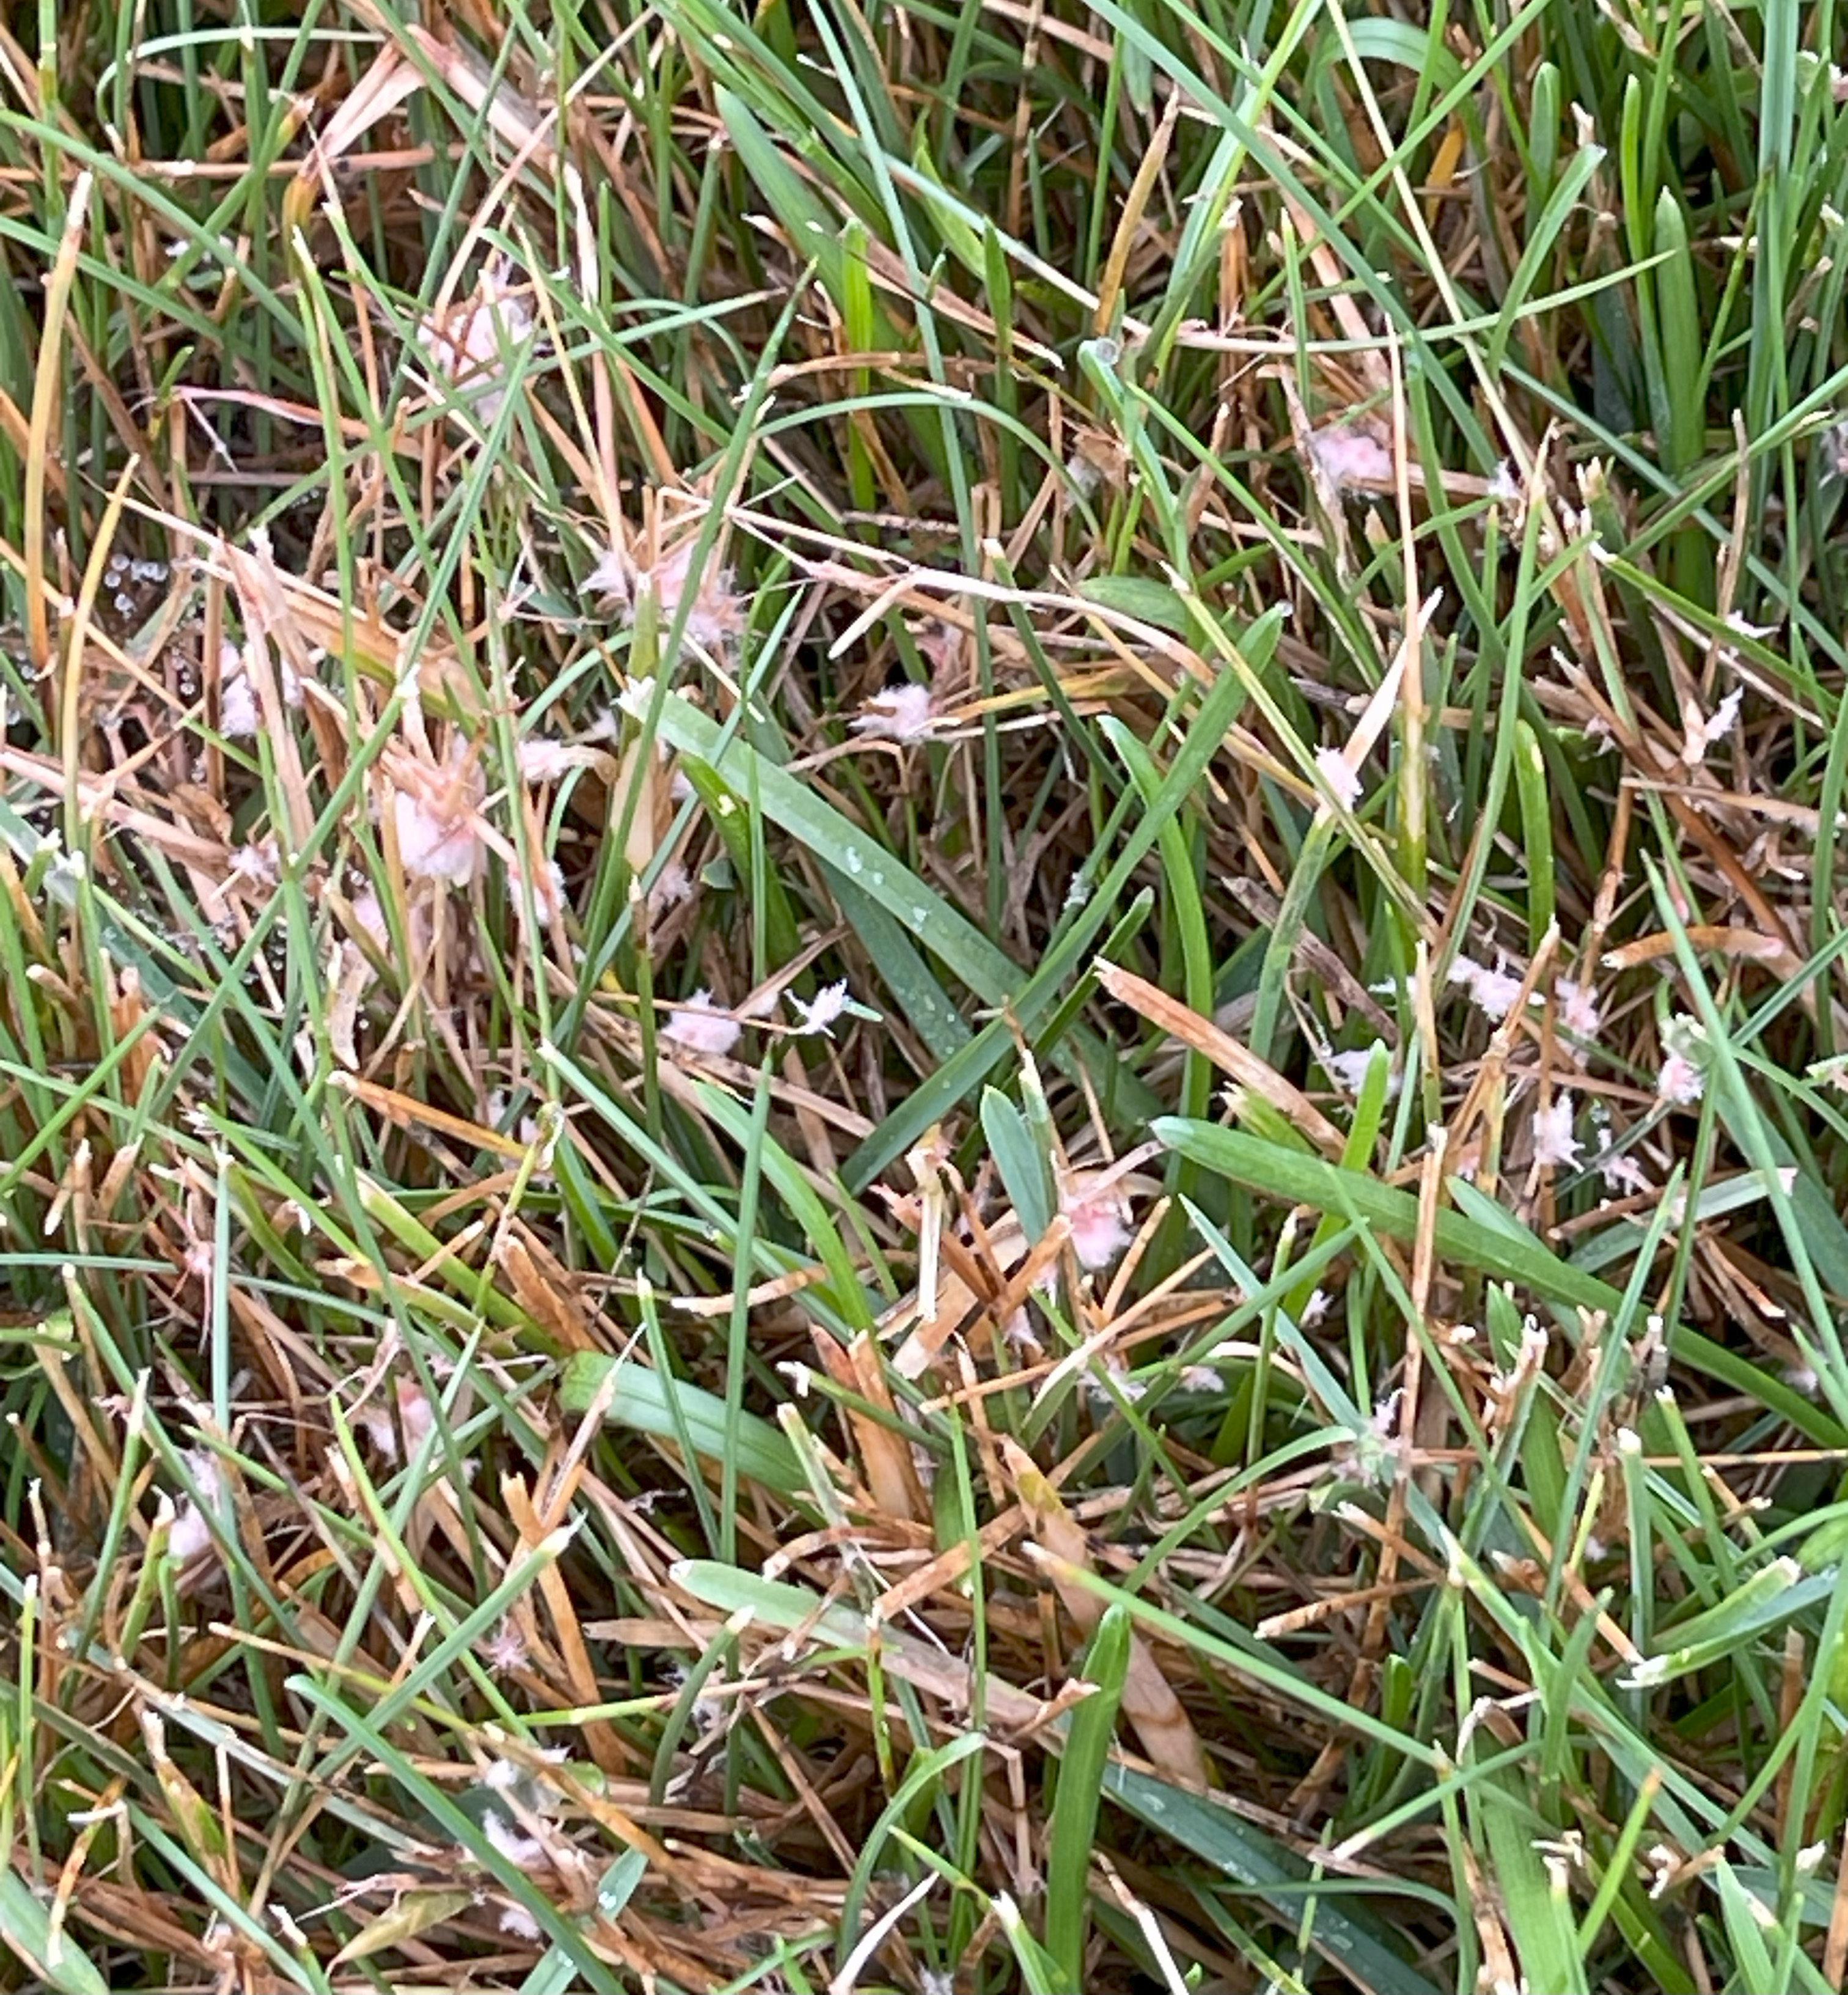 Red thread in grass.